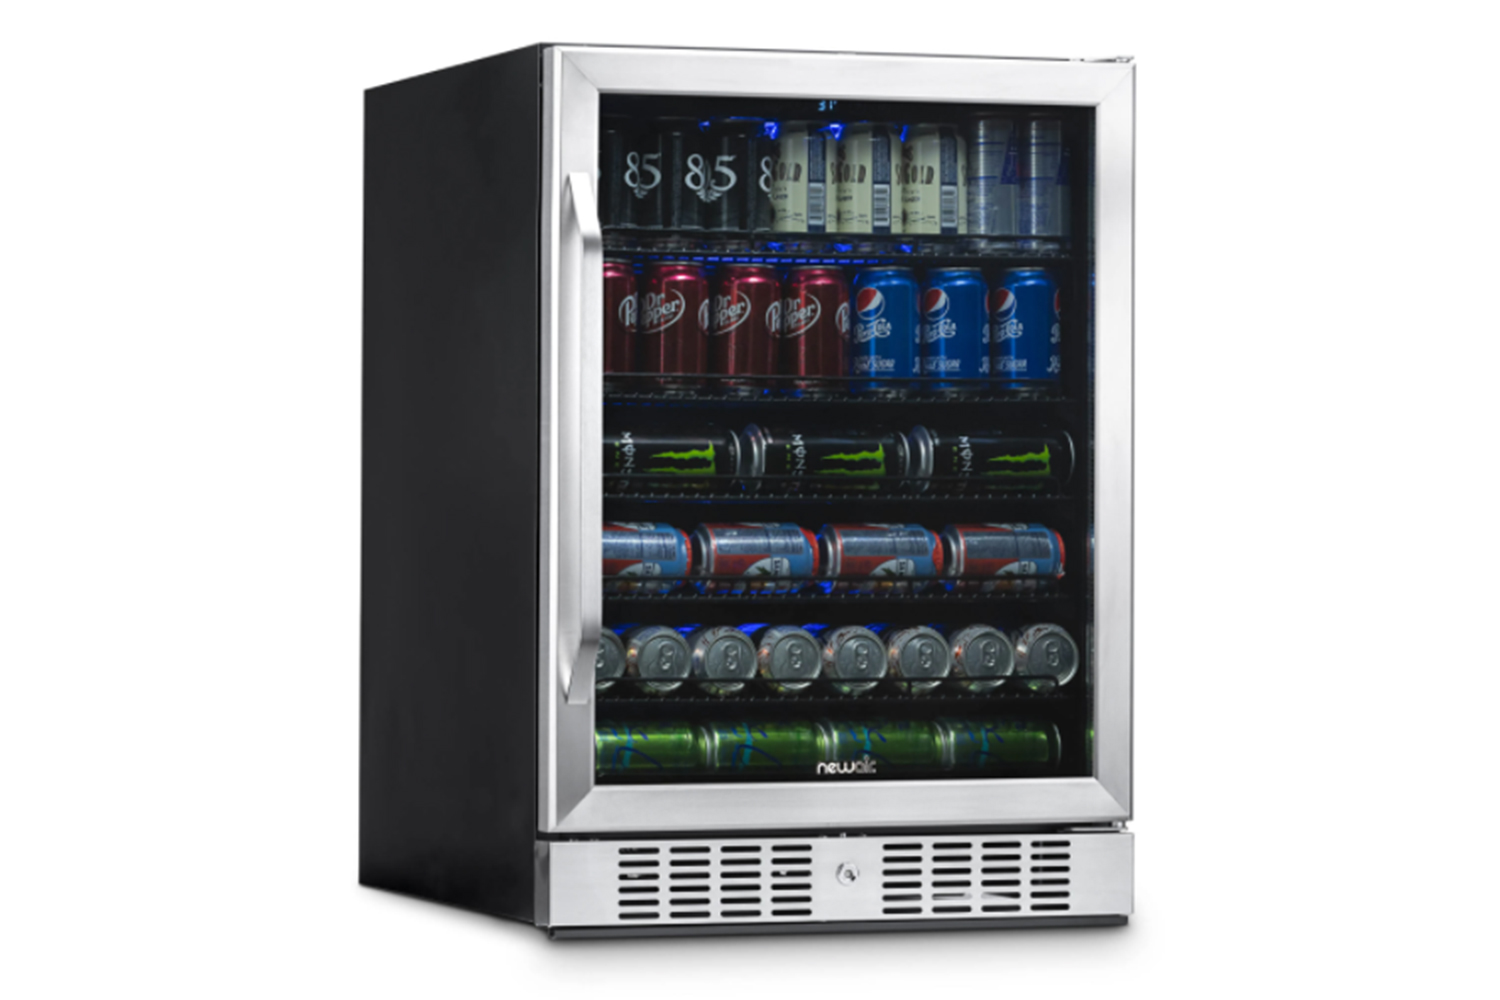 https://www.themanual.com/wp-content/uploads/sites/9/2020/11/newair-24-inch-built-in-177-can-beverage-fridge.jpg?fit=800%2C533&p=1